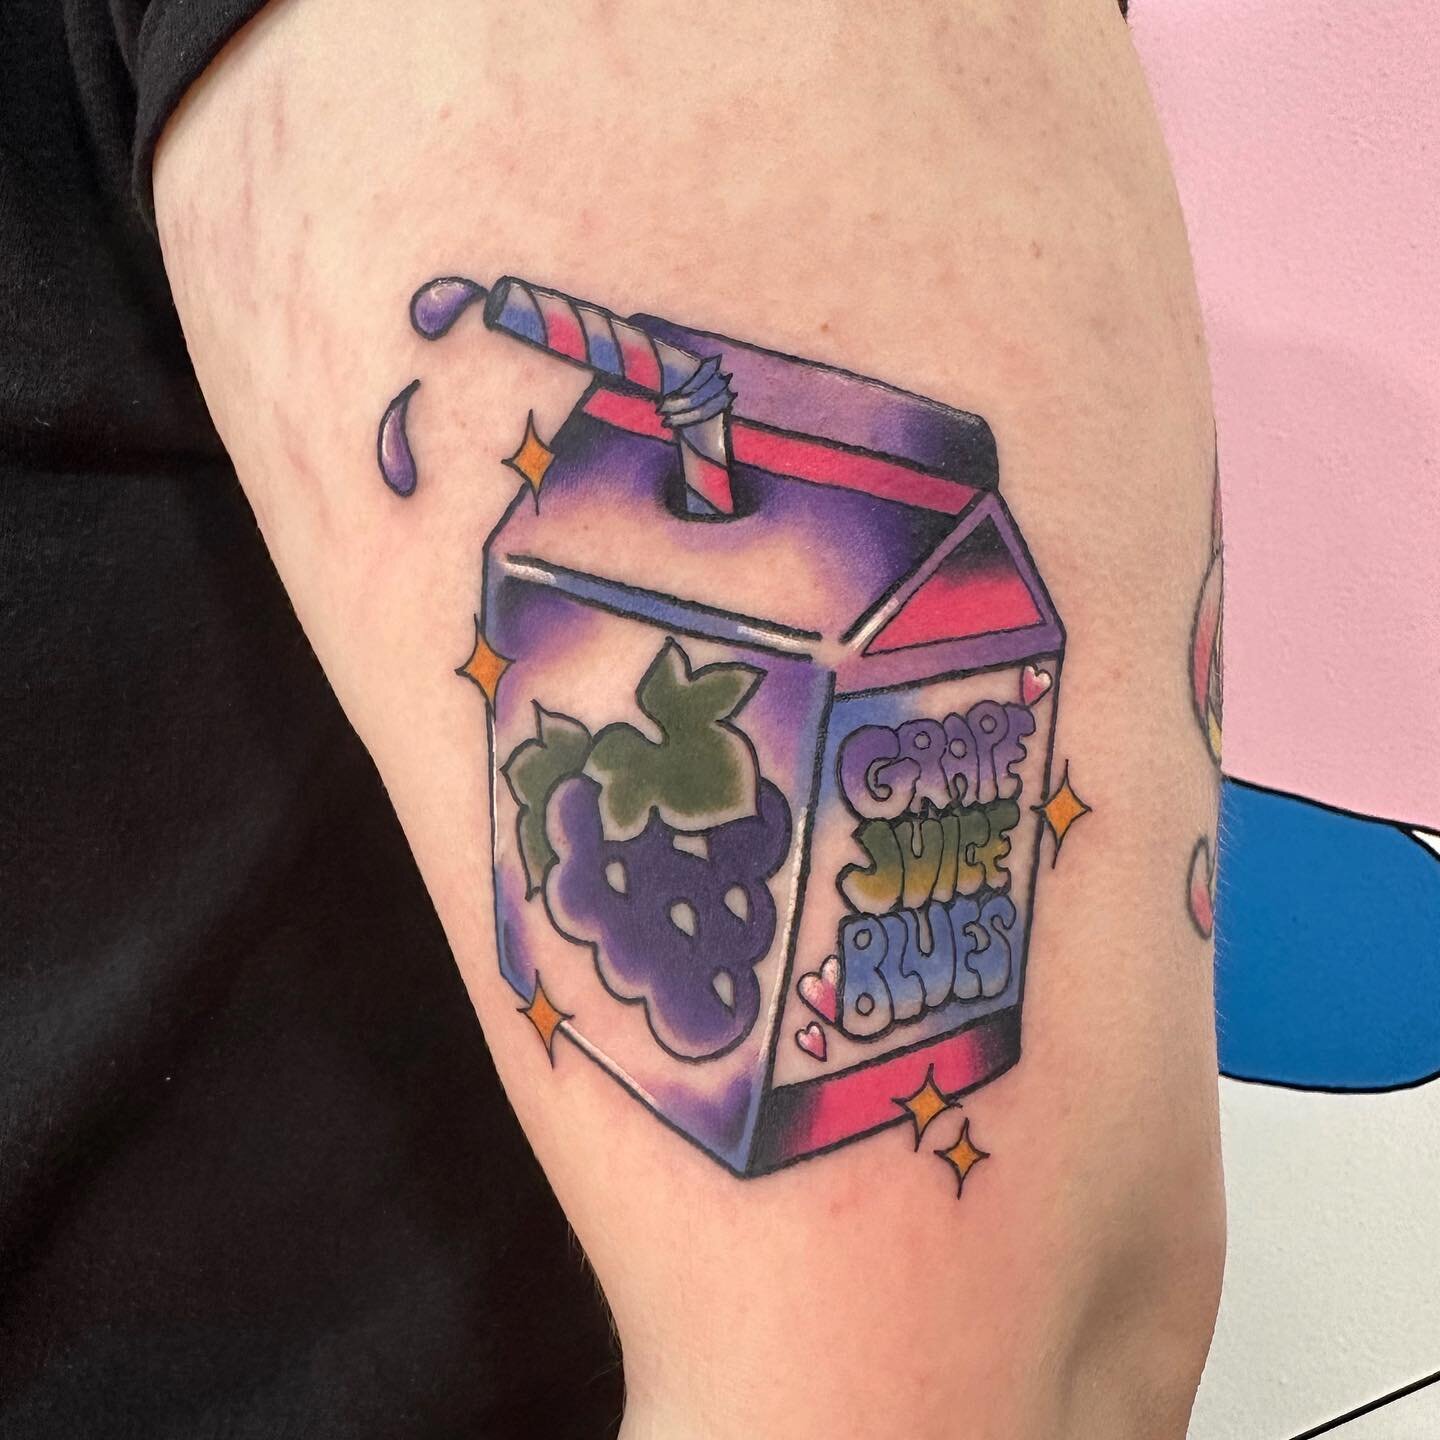 🍇Grape Juice Blues🍇 for the lovely @abbeypetric! Thank you so much for the great conversation and making the trip out. Absolutely loved making this for you! #grapejuice #grapejuiceblues #harrystyles #harrystylestattoos #harrystylestattoo #hslot #ta